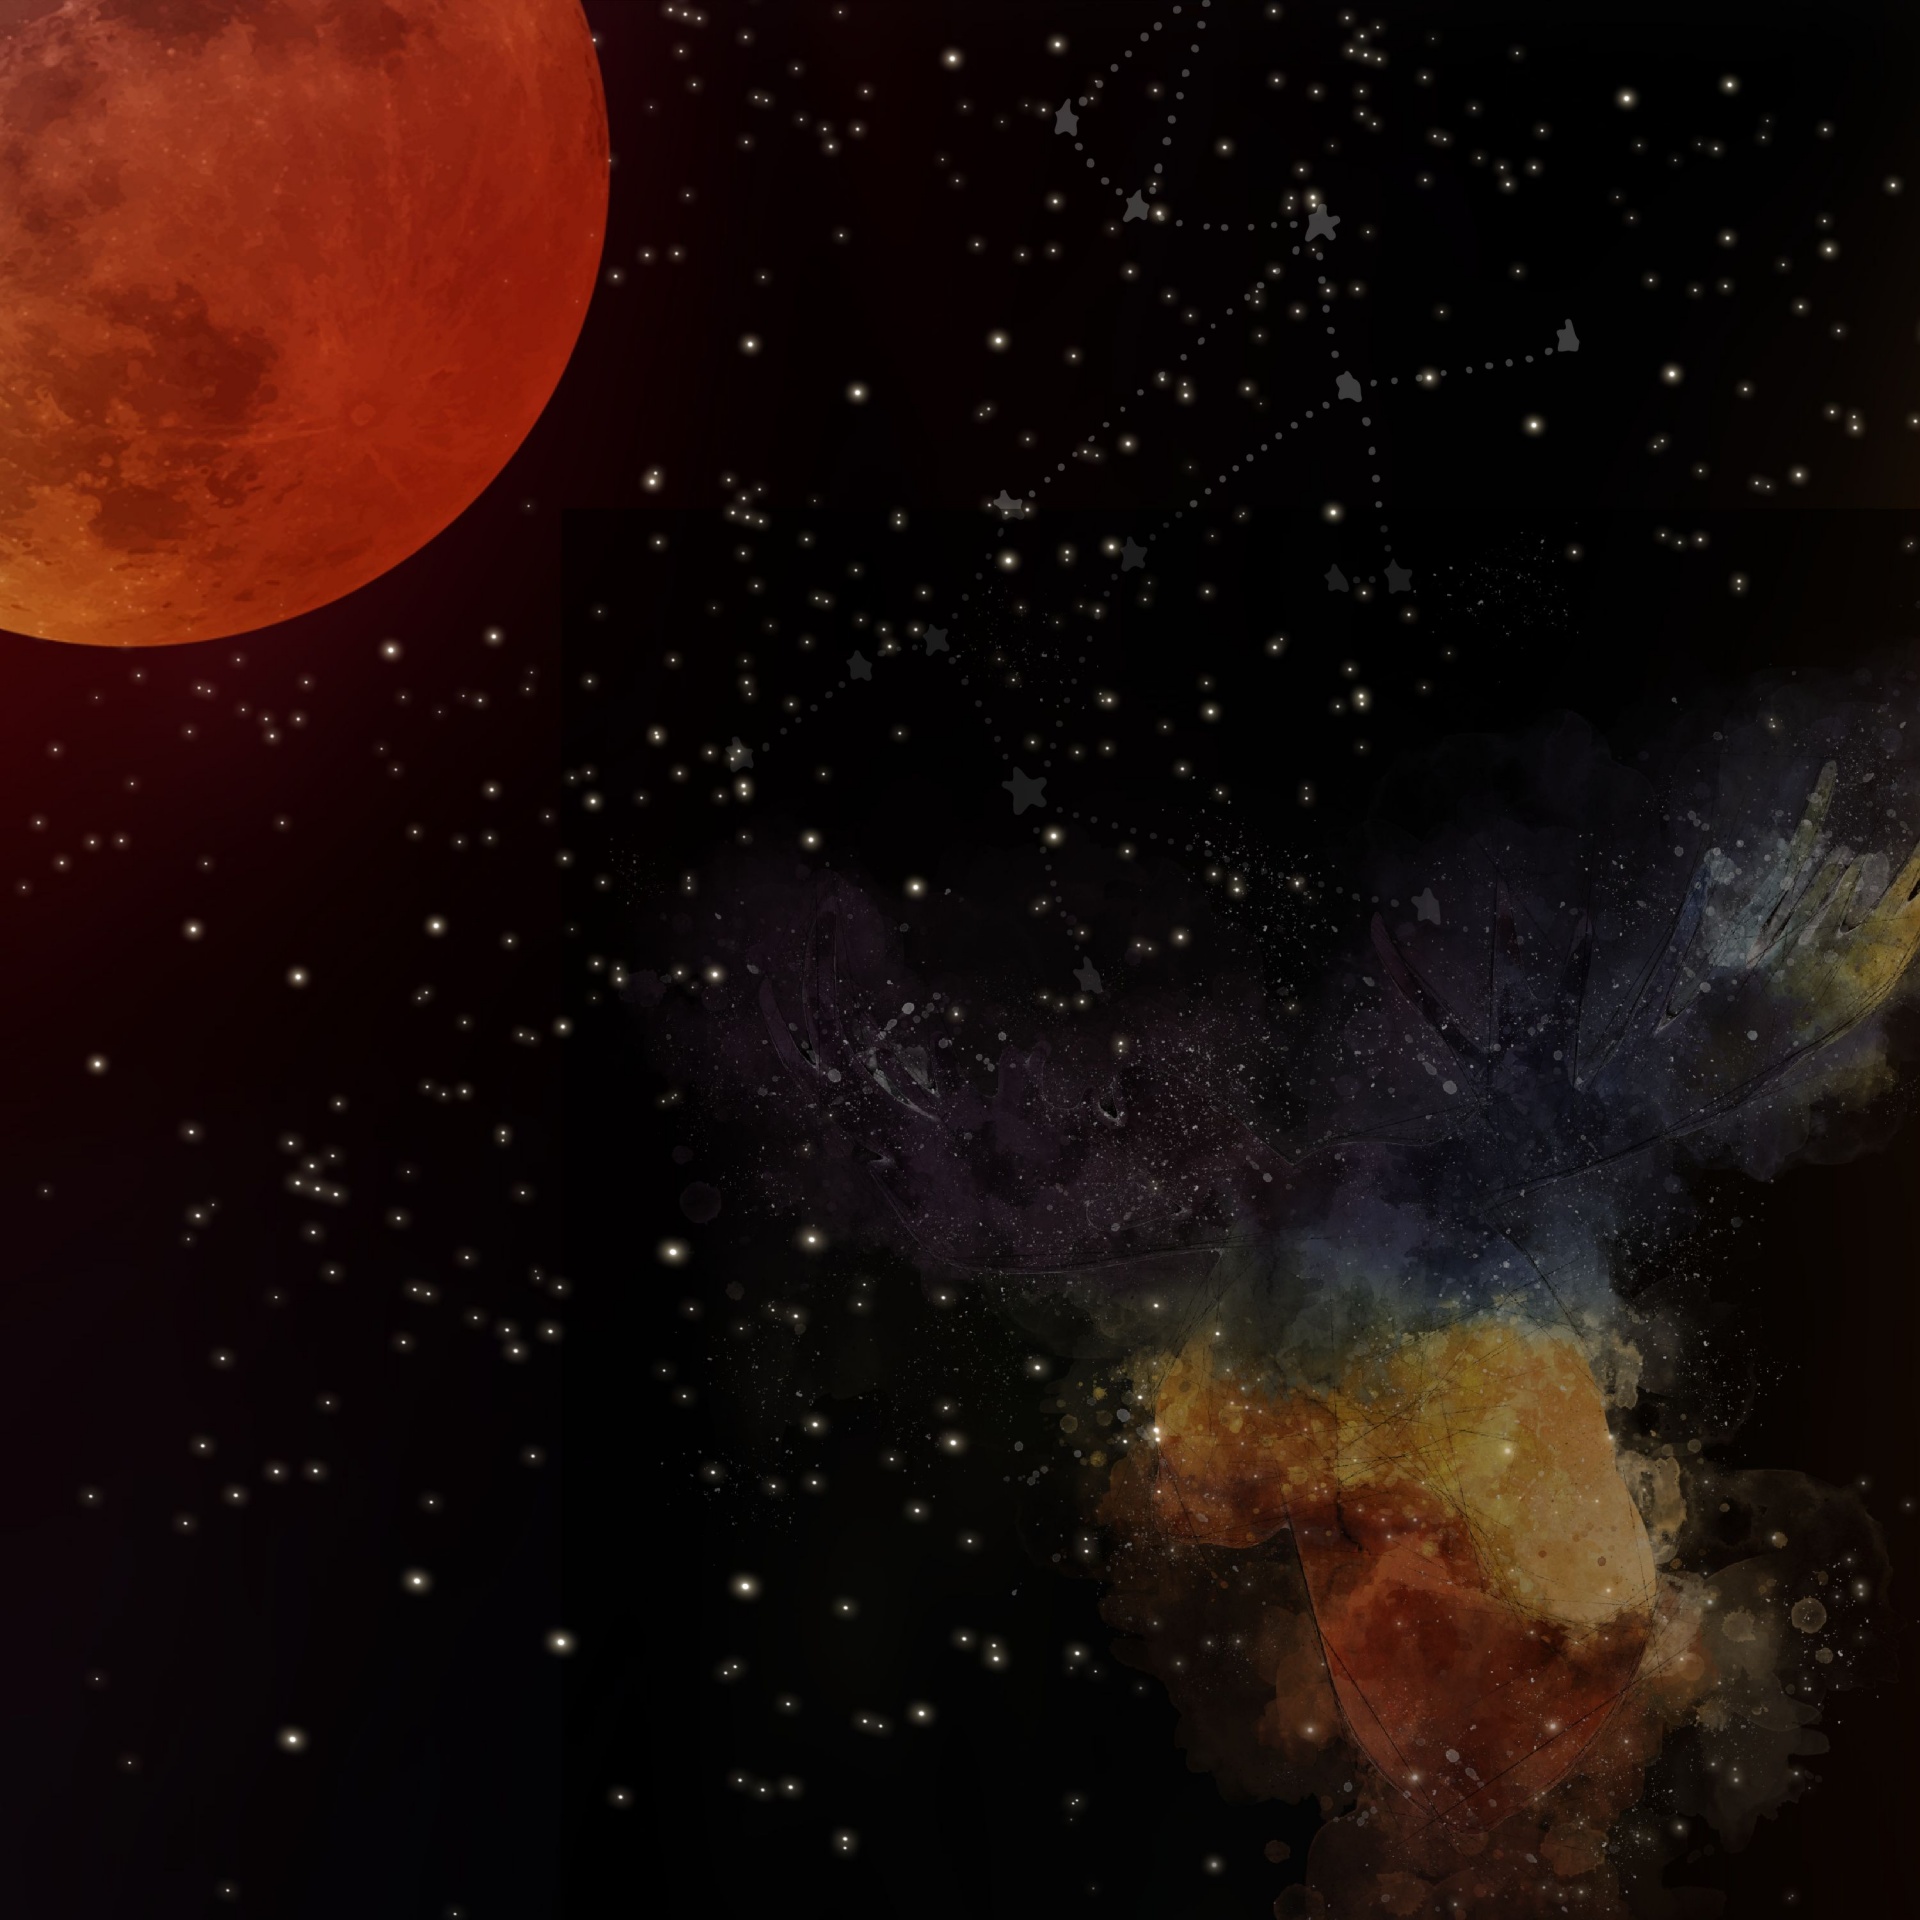 red full moon and colorful abstract nebula on a dark sky filled with stars